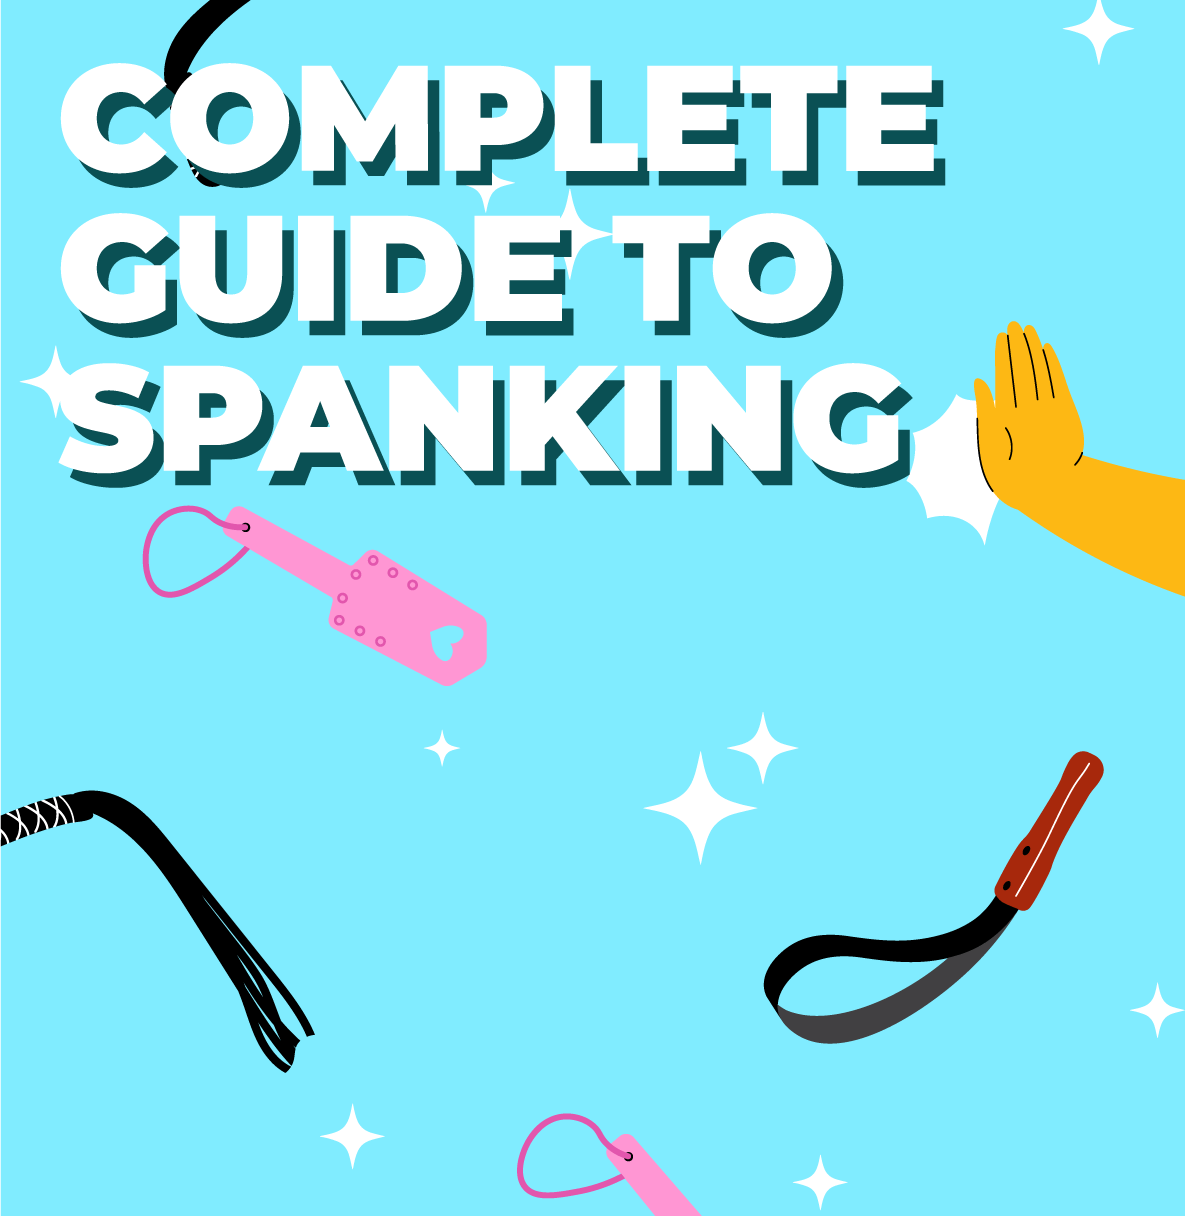 Complete Guide to Spanking